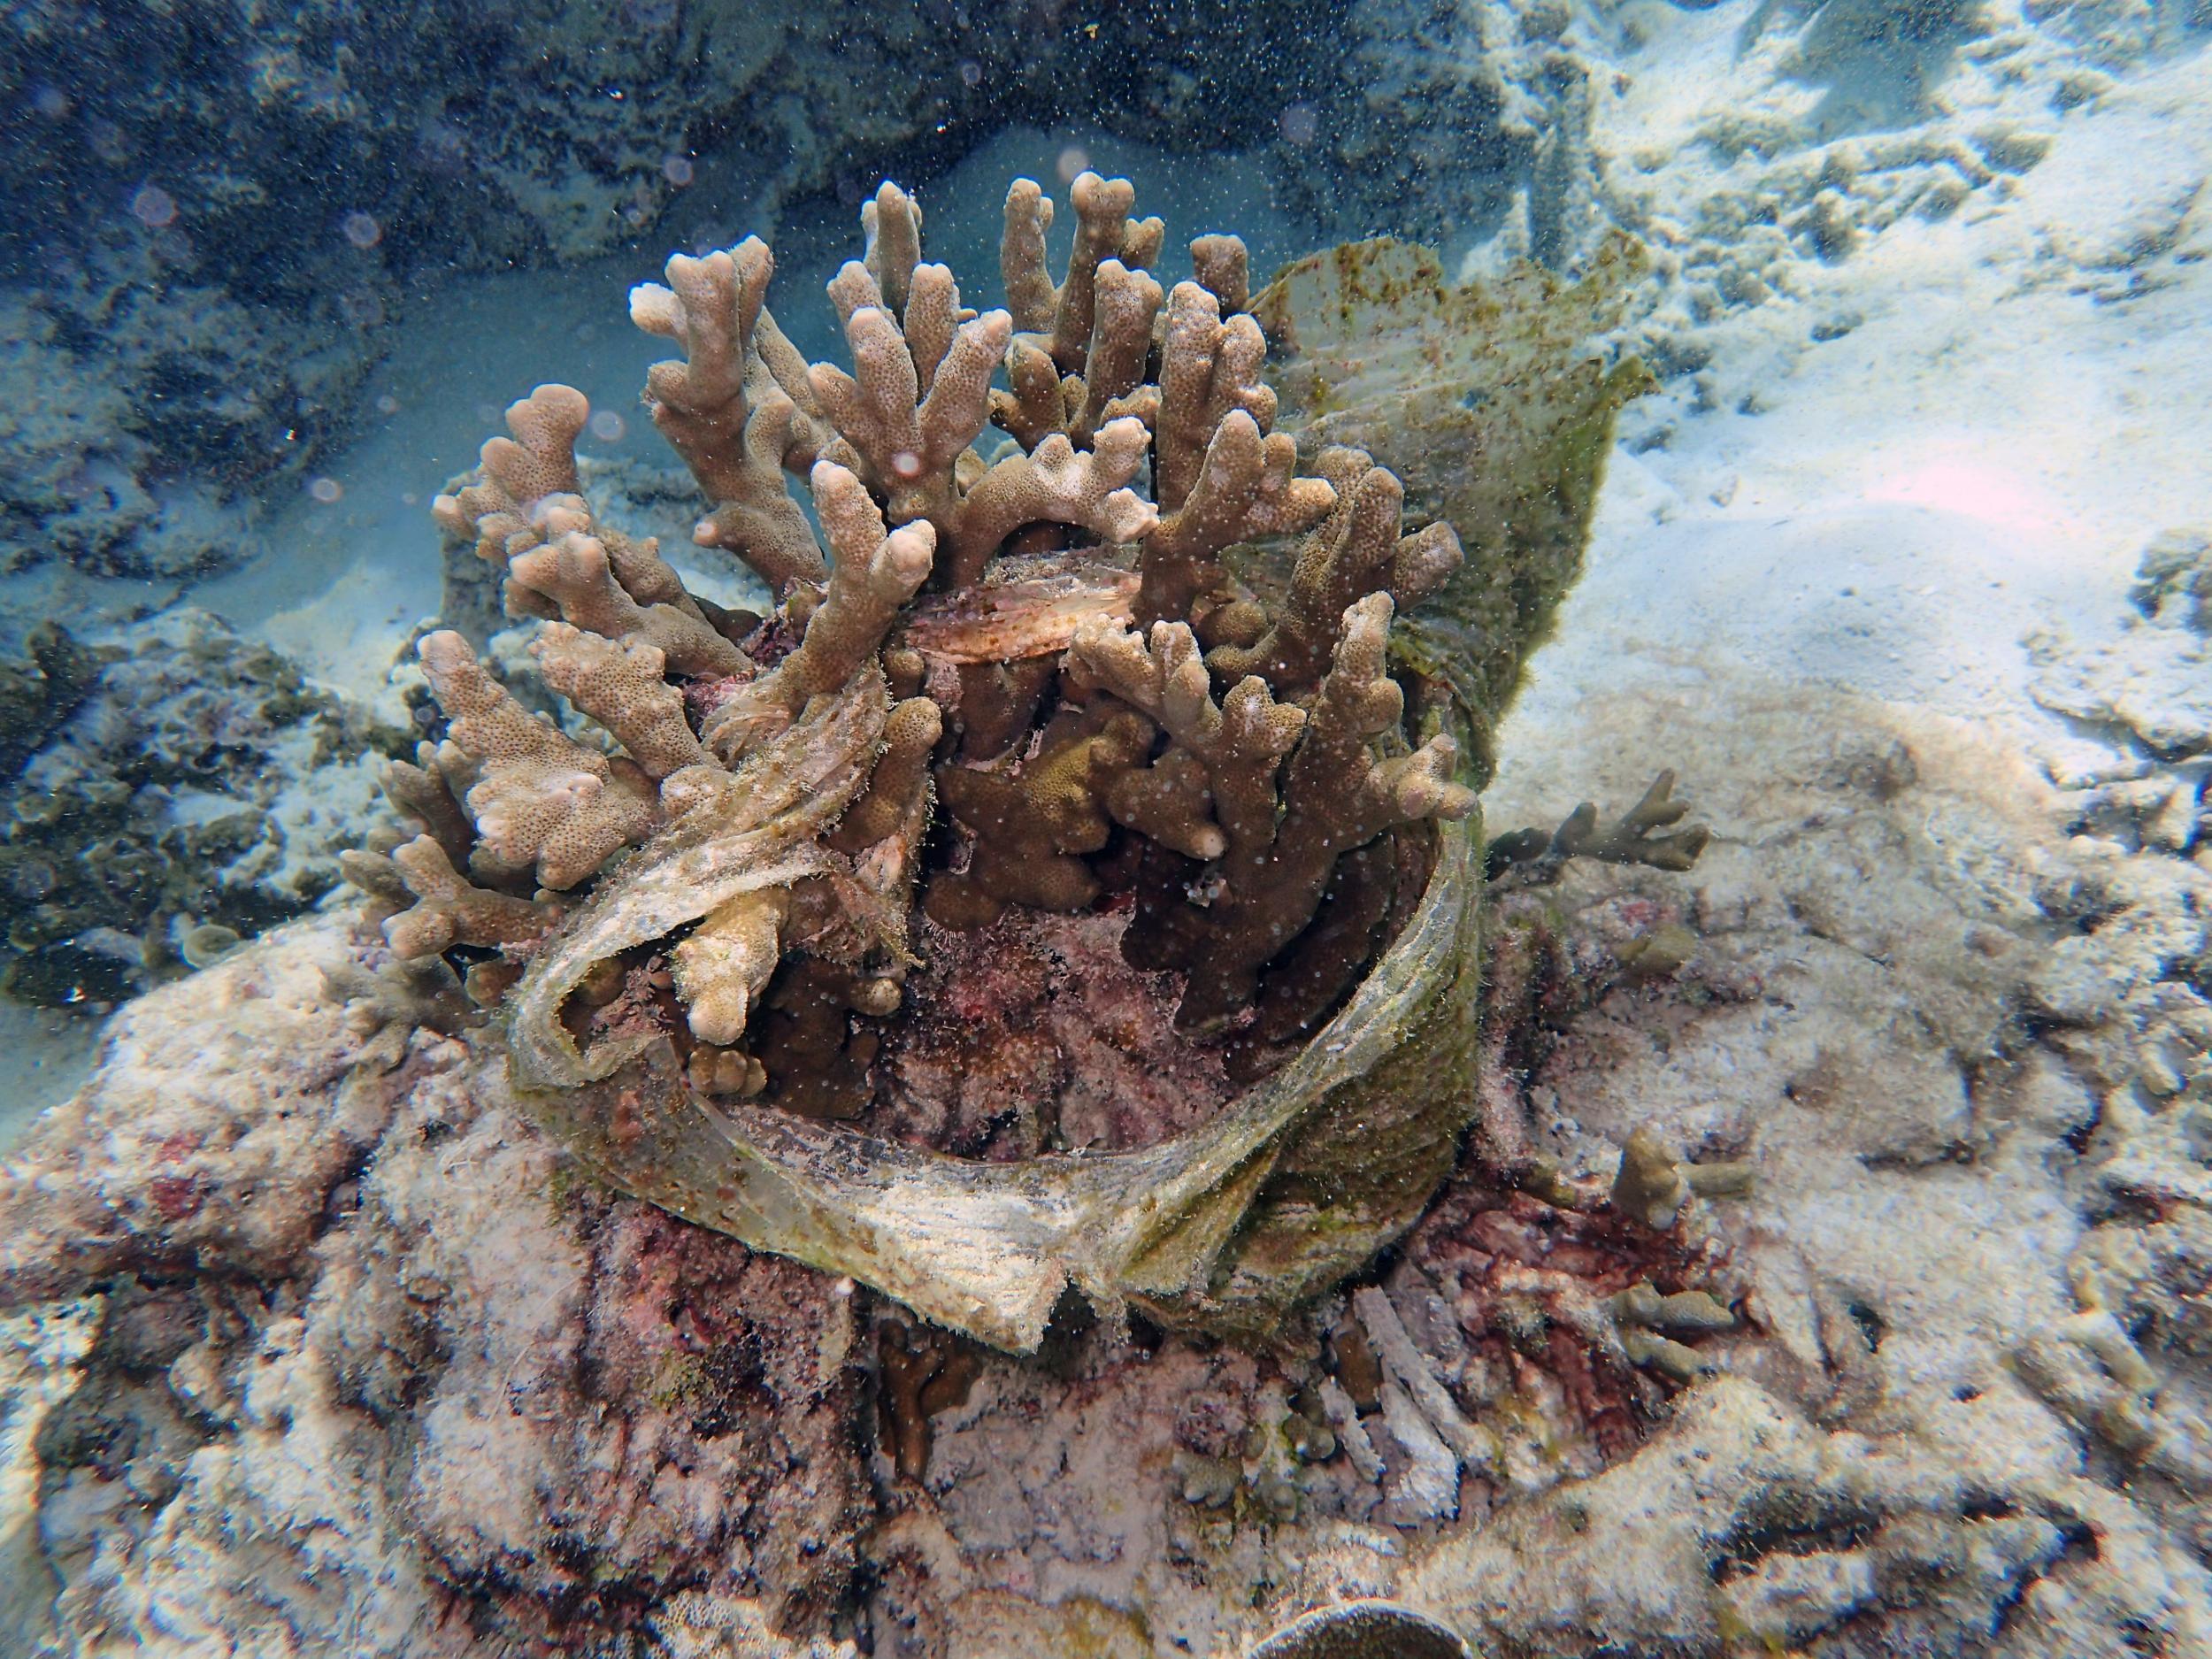 A spawning coral wrapped in a plastic bag